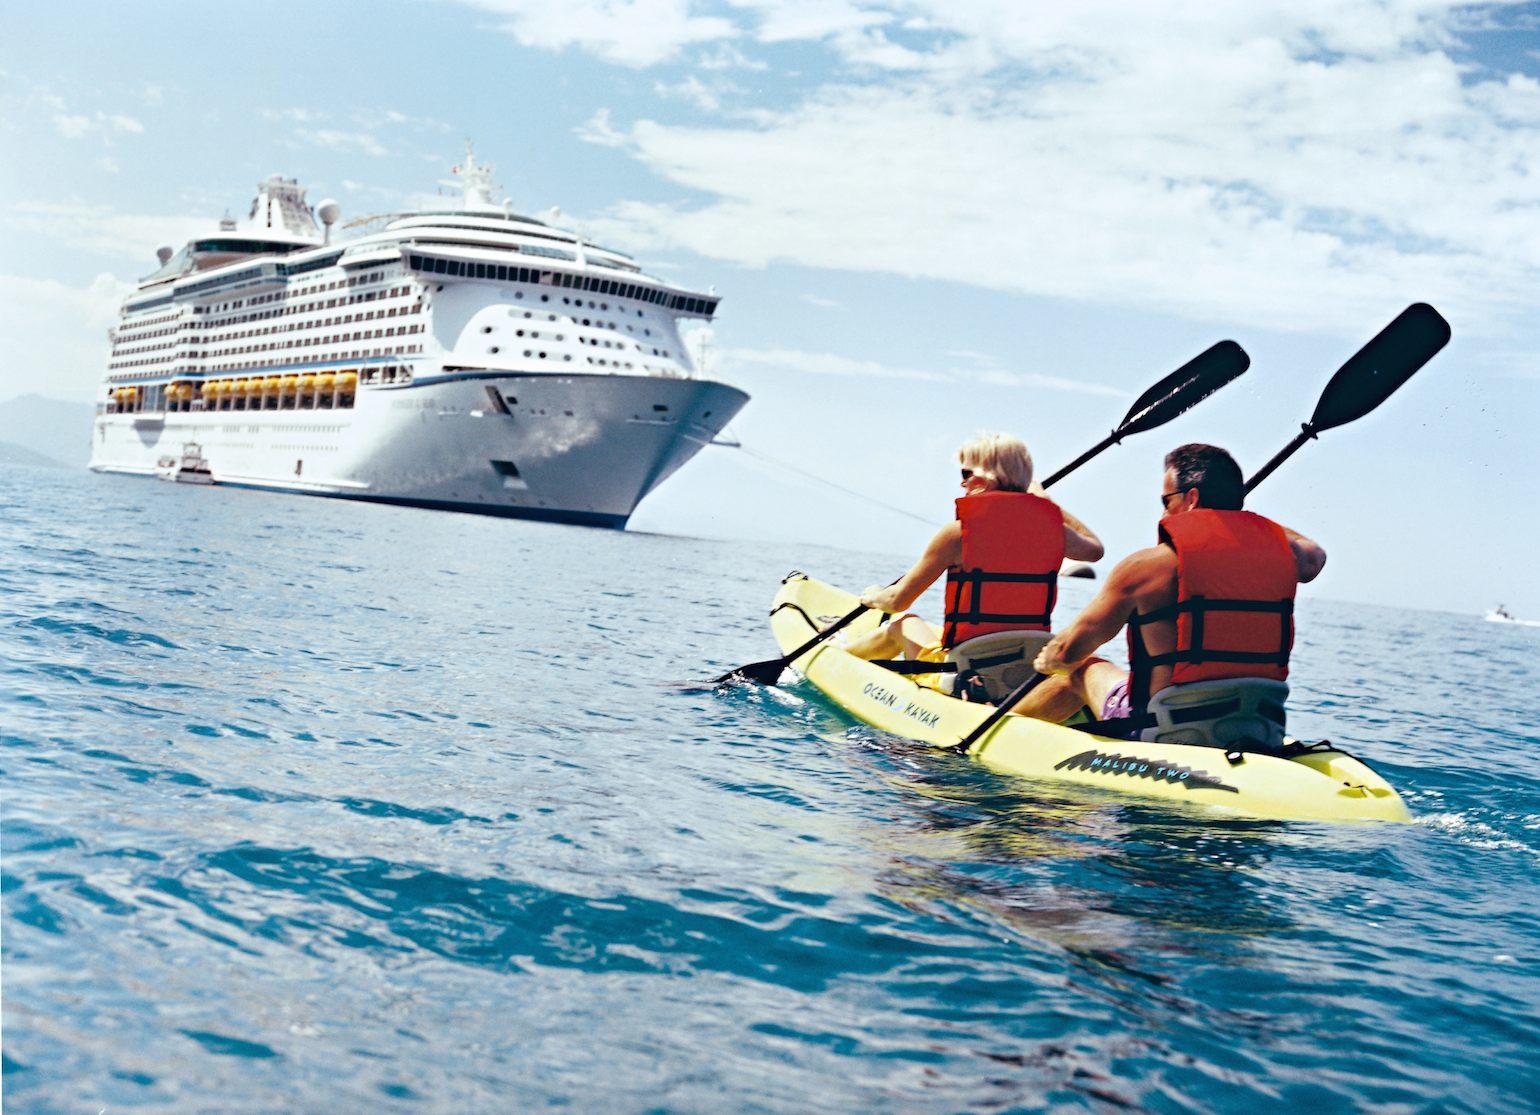 Voyager of the Seas Cruise ShipCruise Deals Expert